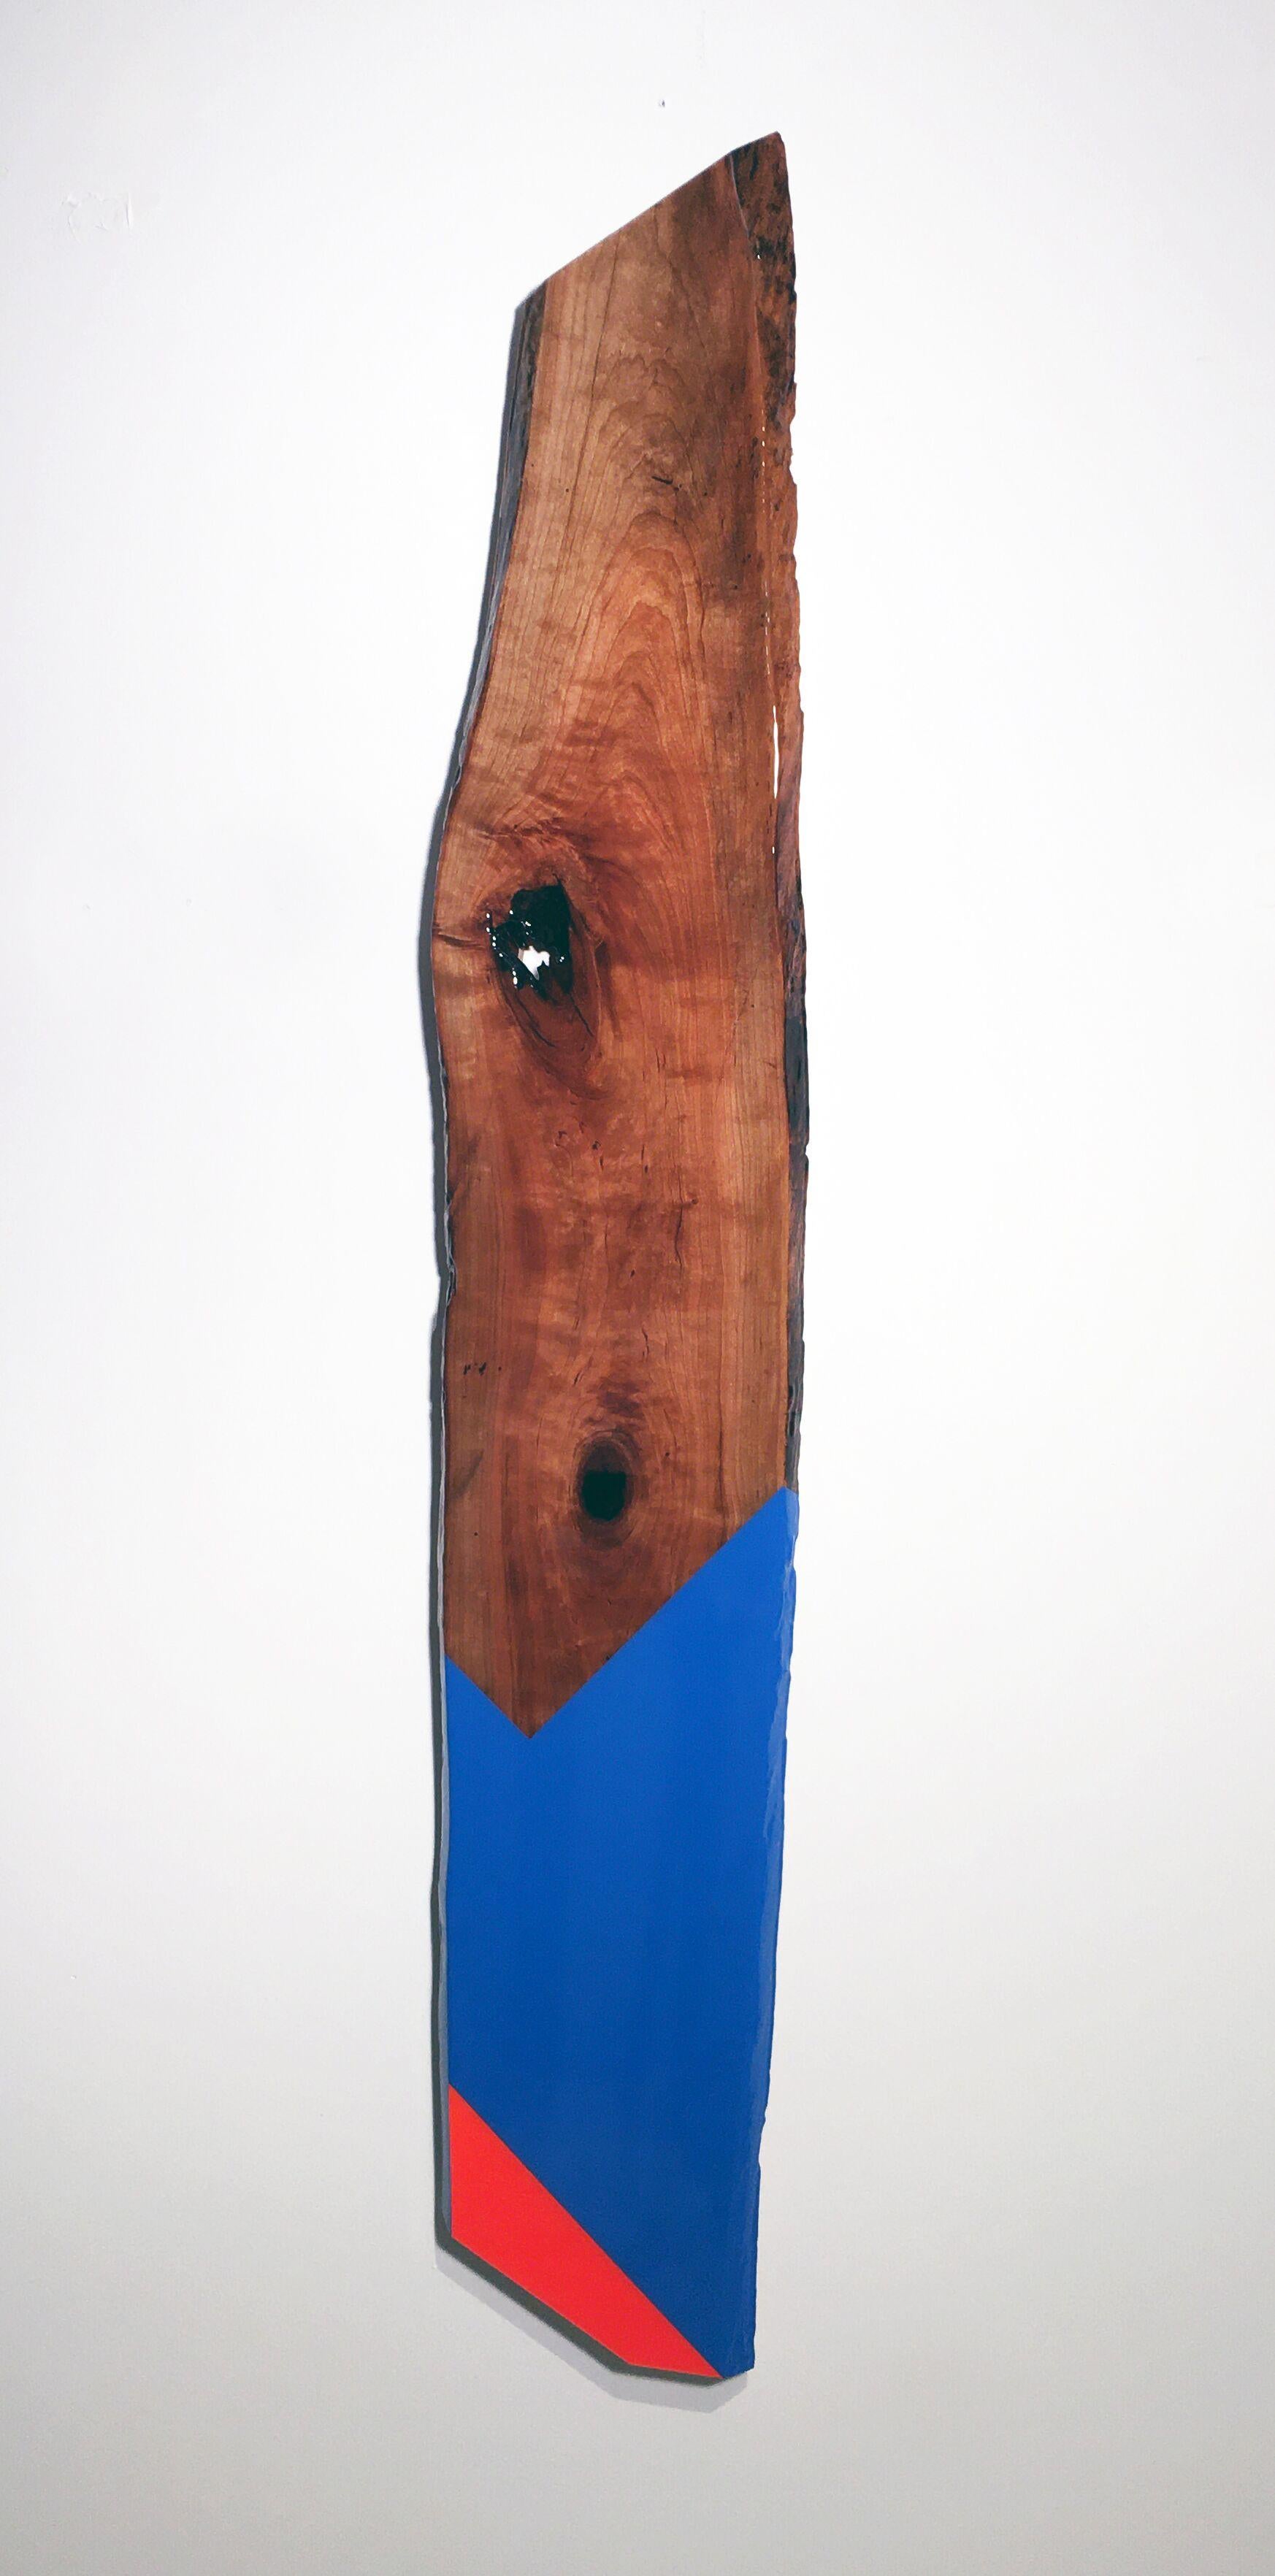 David E. Peterson Abstract Sculpture - "Leaner 68"